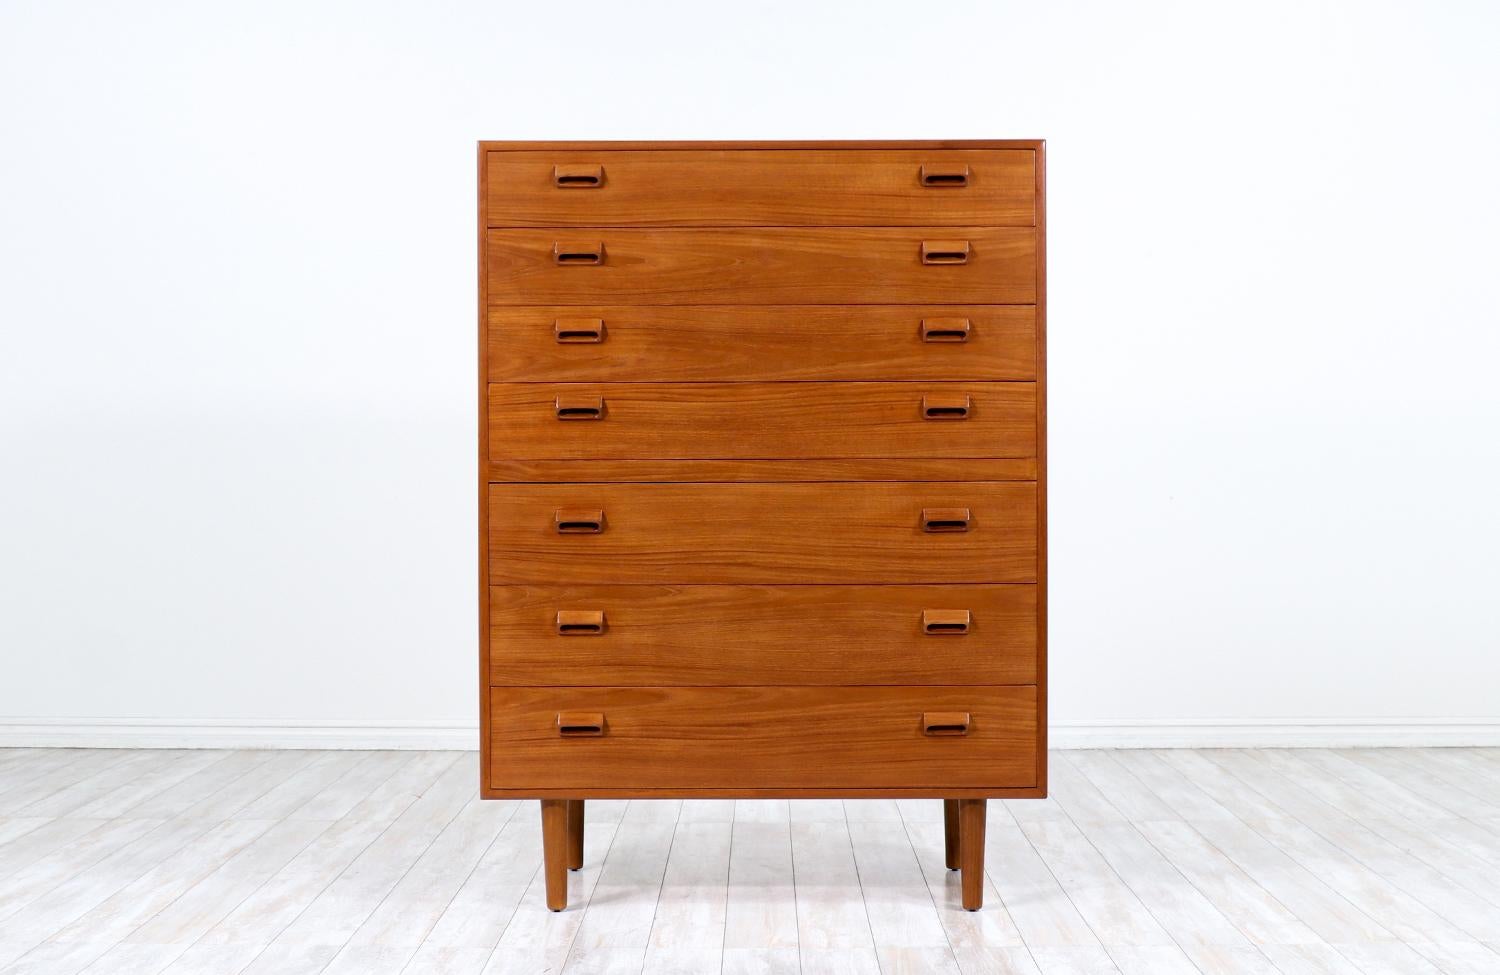 Danish Modern teak chest of drawers by Børge Mogensen for Søborg Møbler.

________________________________________

Transforming a piece of Mid-Century Modern furniture is like bringing history back to life, and we take this journey with passion and